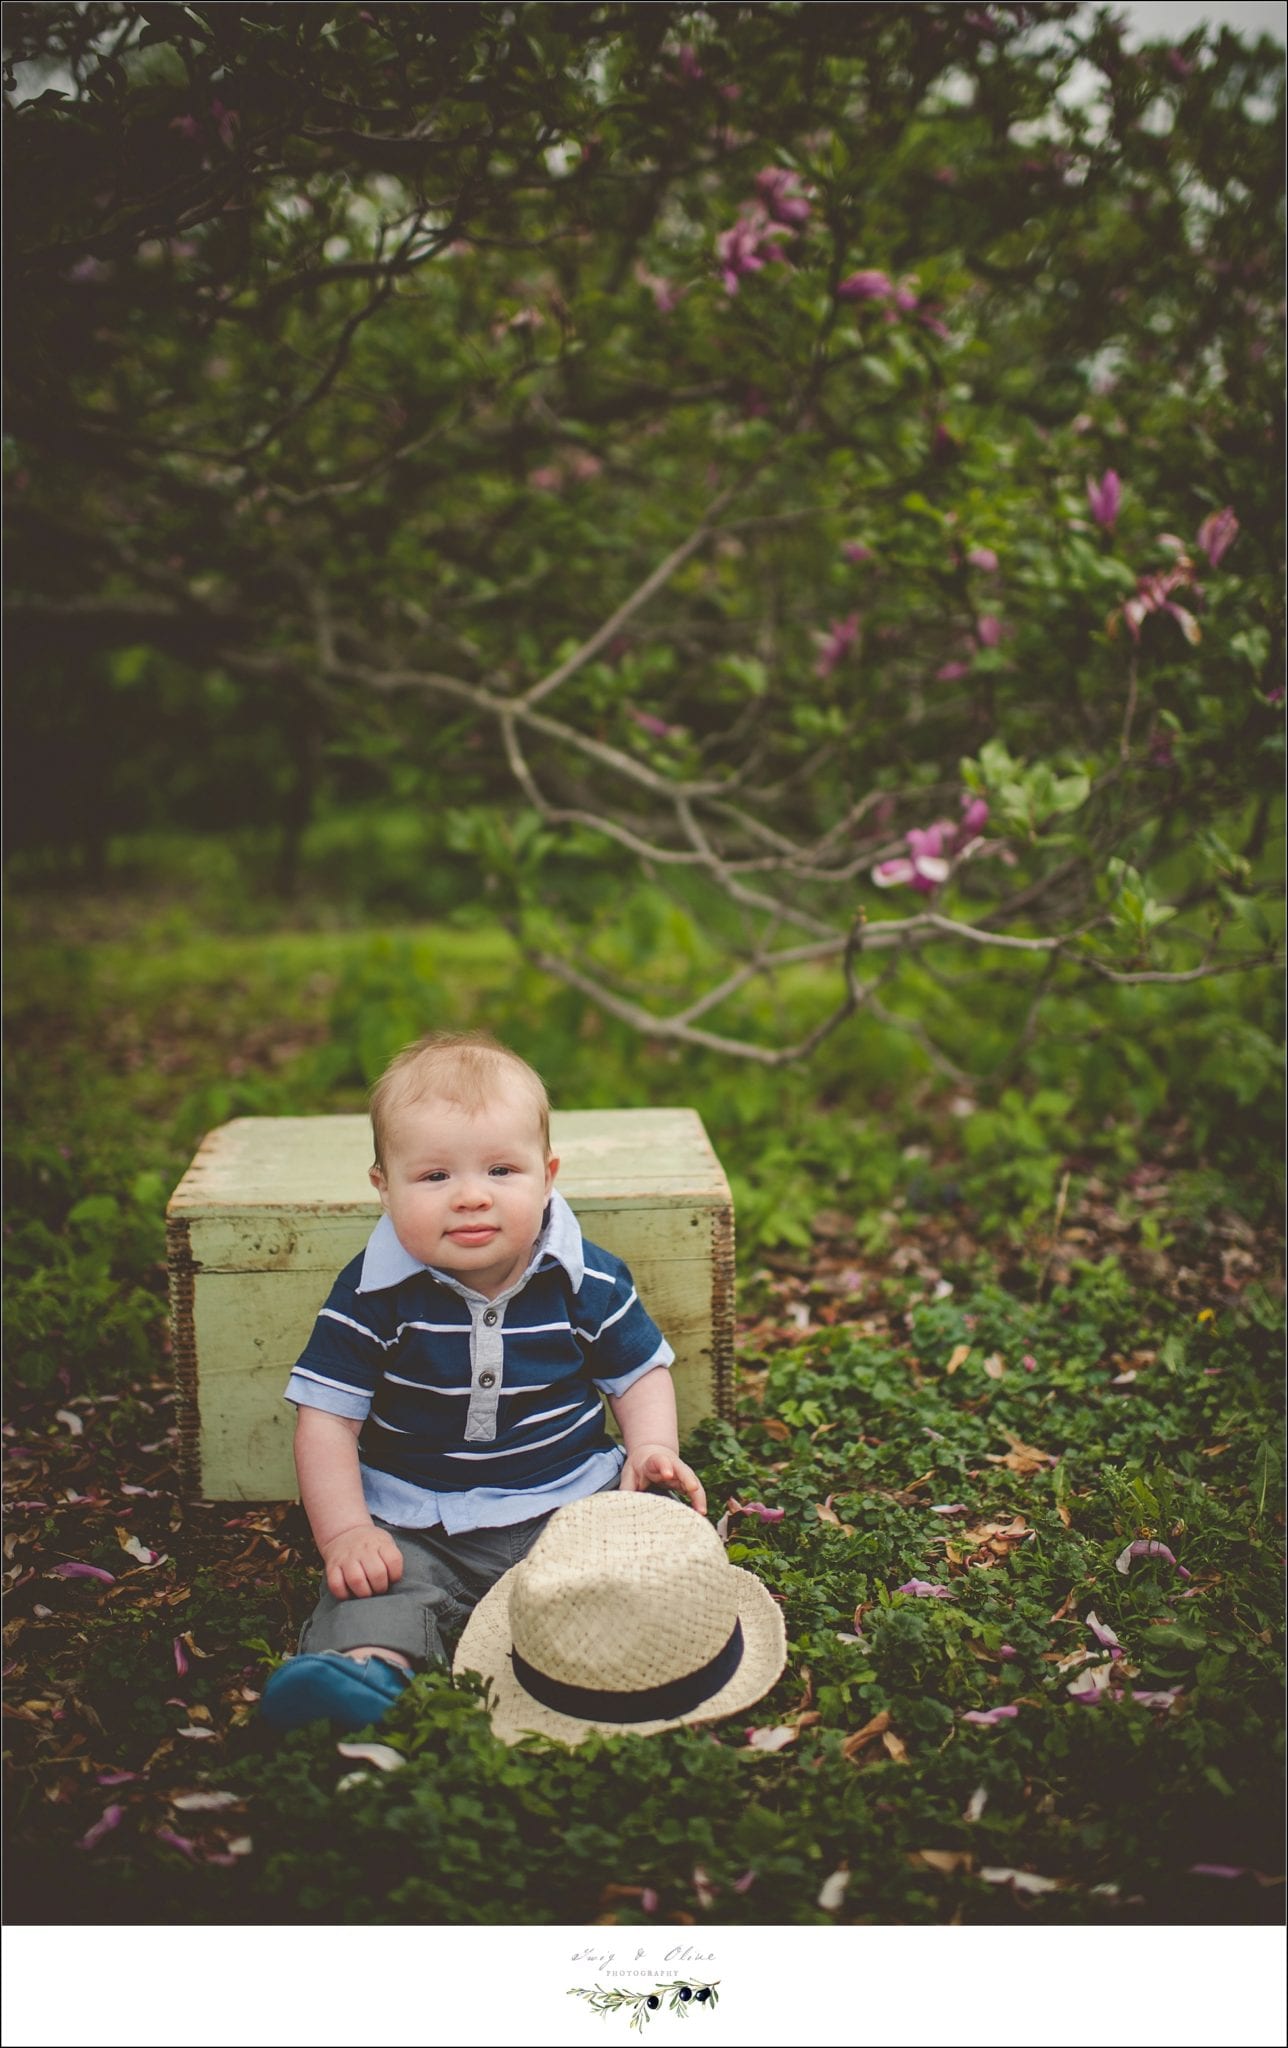 six month old session, Madison WI, Twig and Olive, Wisconsin photography, babies, blankets, smiling happy babies, happy parents, outdoor sessions, blooming flowers, baskets, benches, fedoras, hats, chunky babies, trees, outdoor backdrops, Twig and Olive Photography babies, baskets, buckets, bonnets, smiles, baby stuff, vintage, rustic, TOP, Twig and Olive, Dane county photography, Madison area photography, sunset photography, Sun Prairie photographers